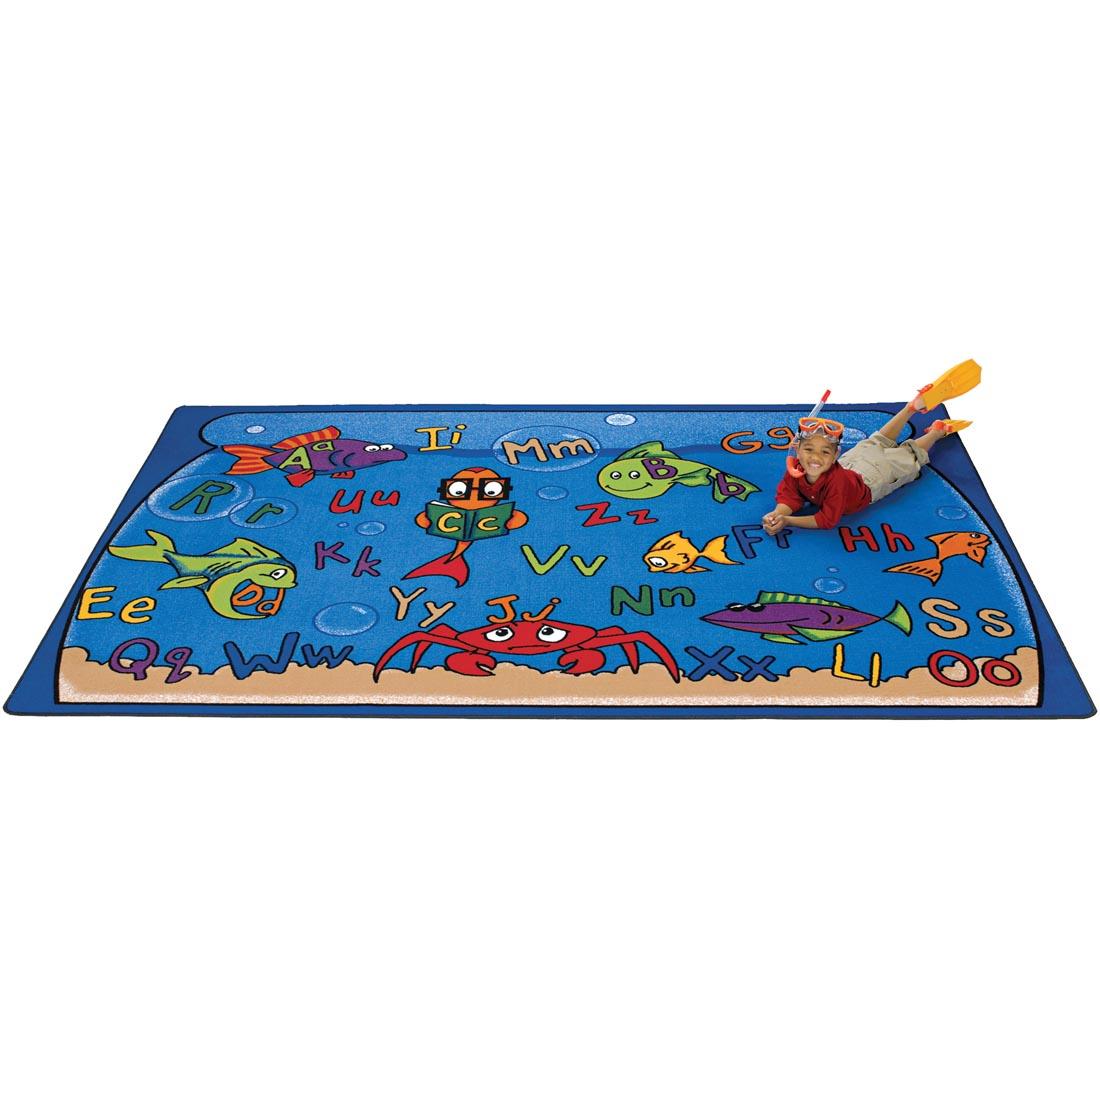 Child wearing snorkeling gear laying on the Alphabet Aquarium Rug by Carpets For Kids